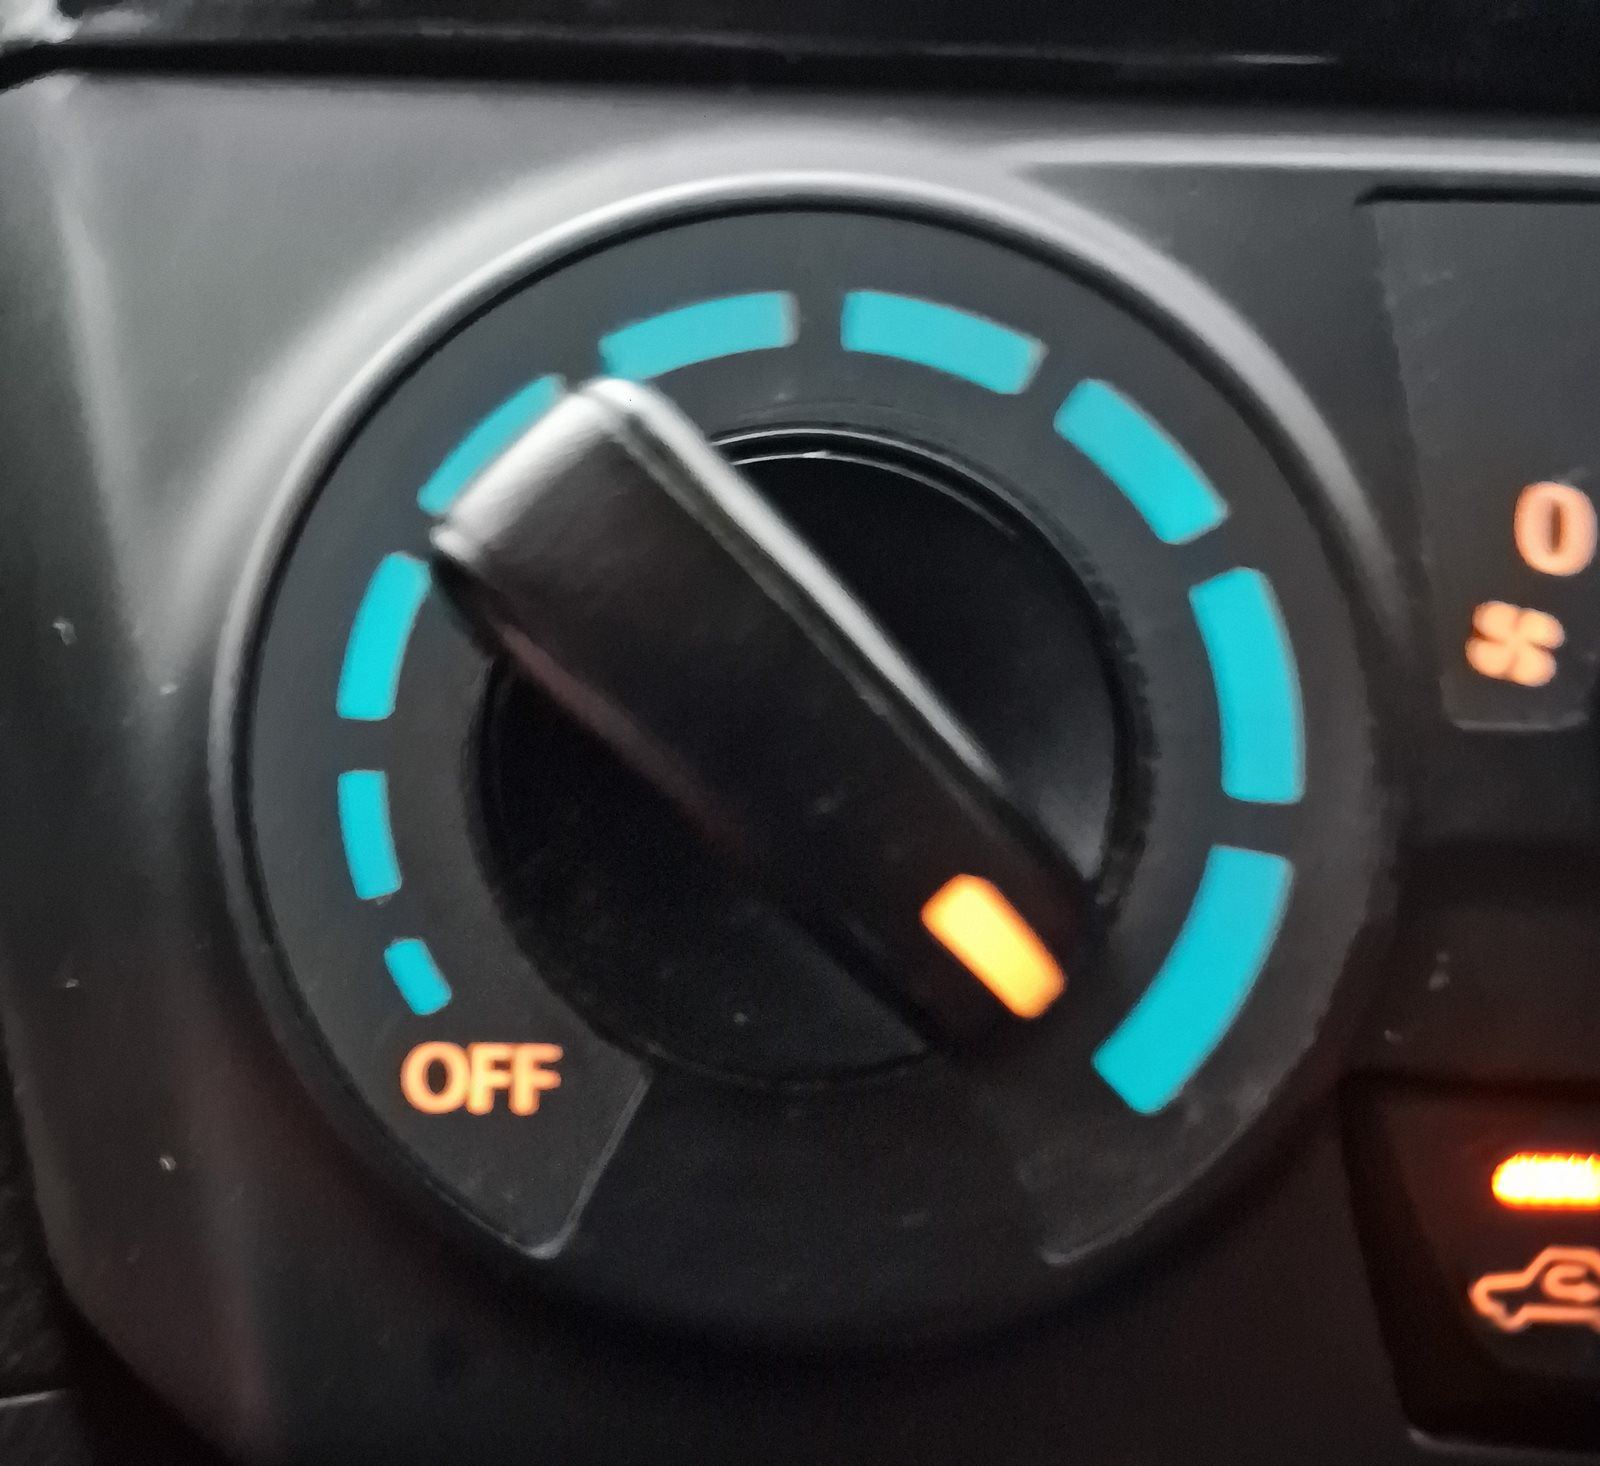 Car Heater Control With No Heat Setting